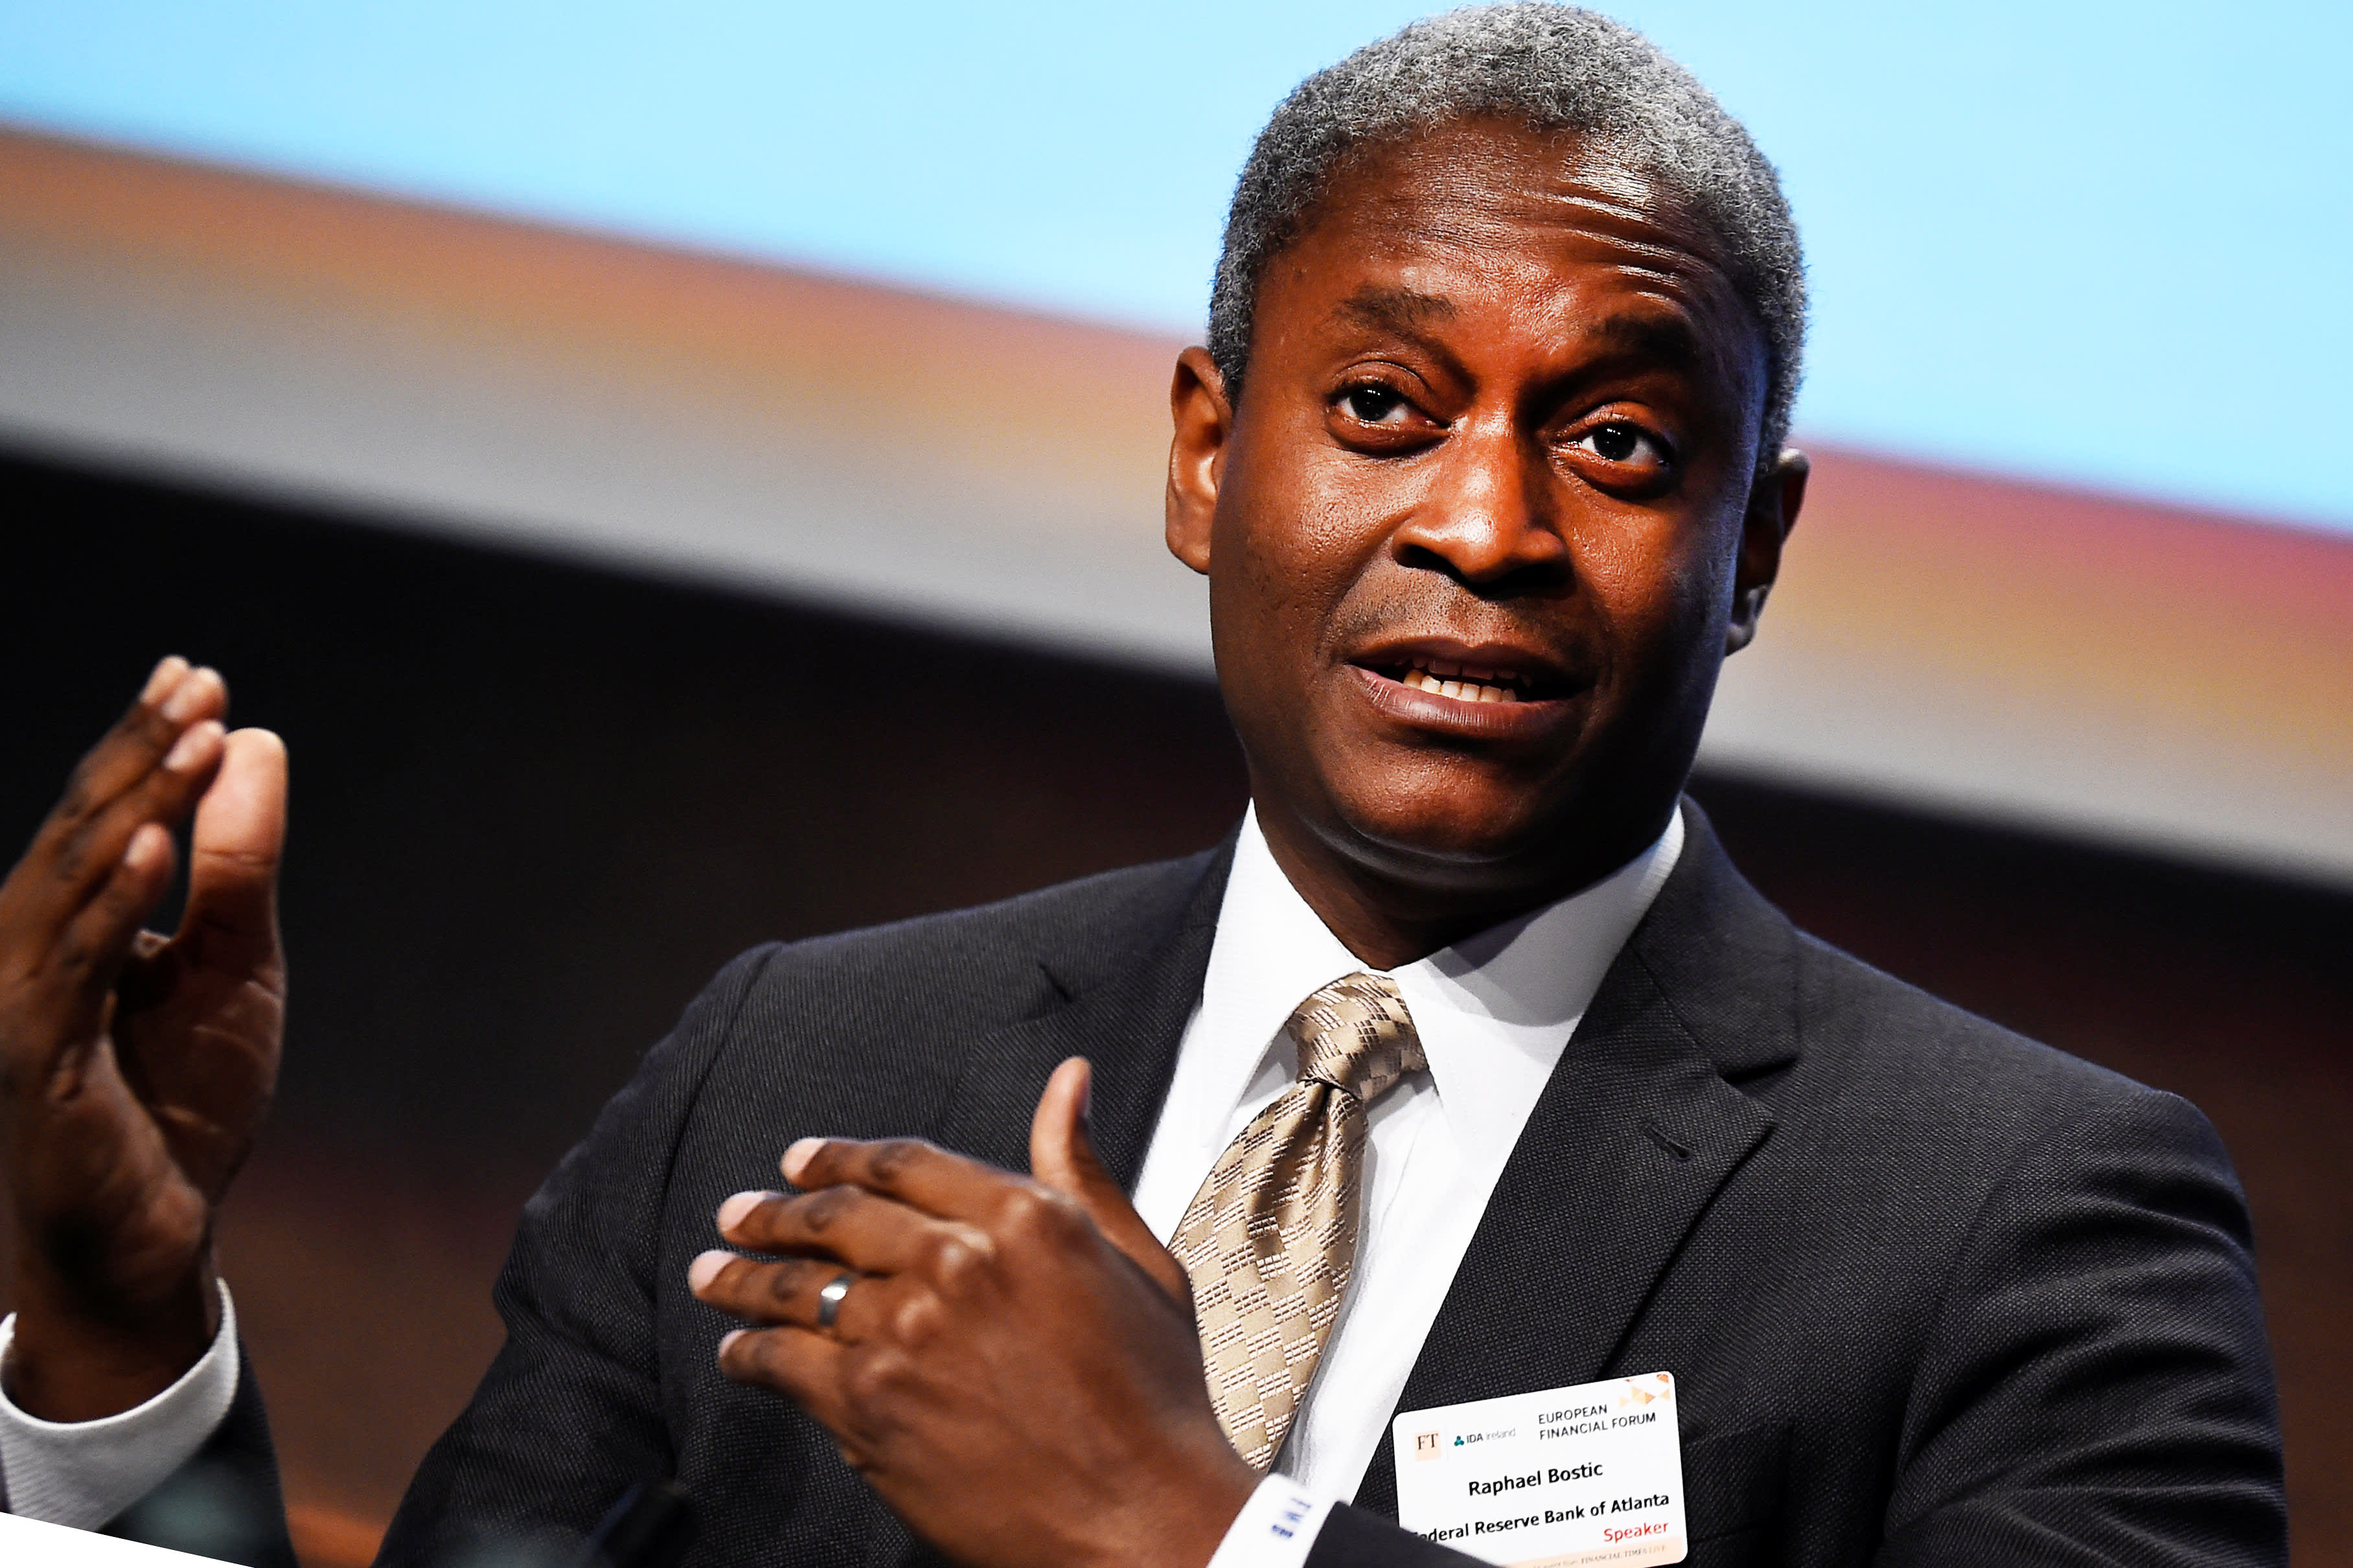 Atlanta Fed President Bostic does not see a rate cut this year like the market is telegraphing